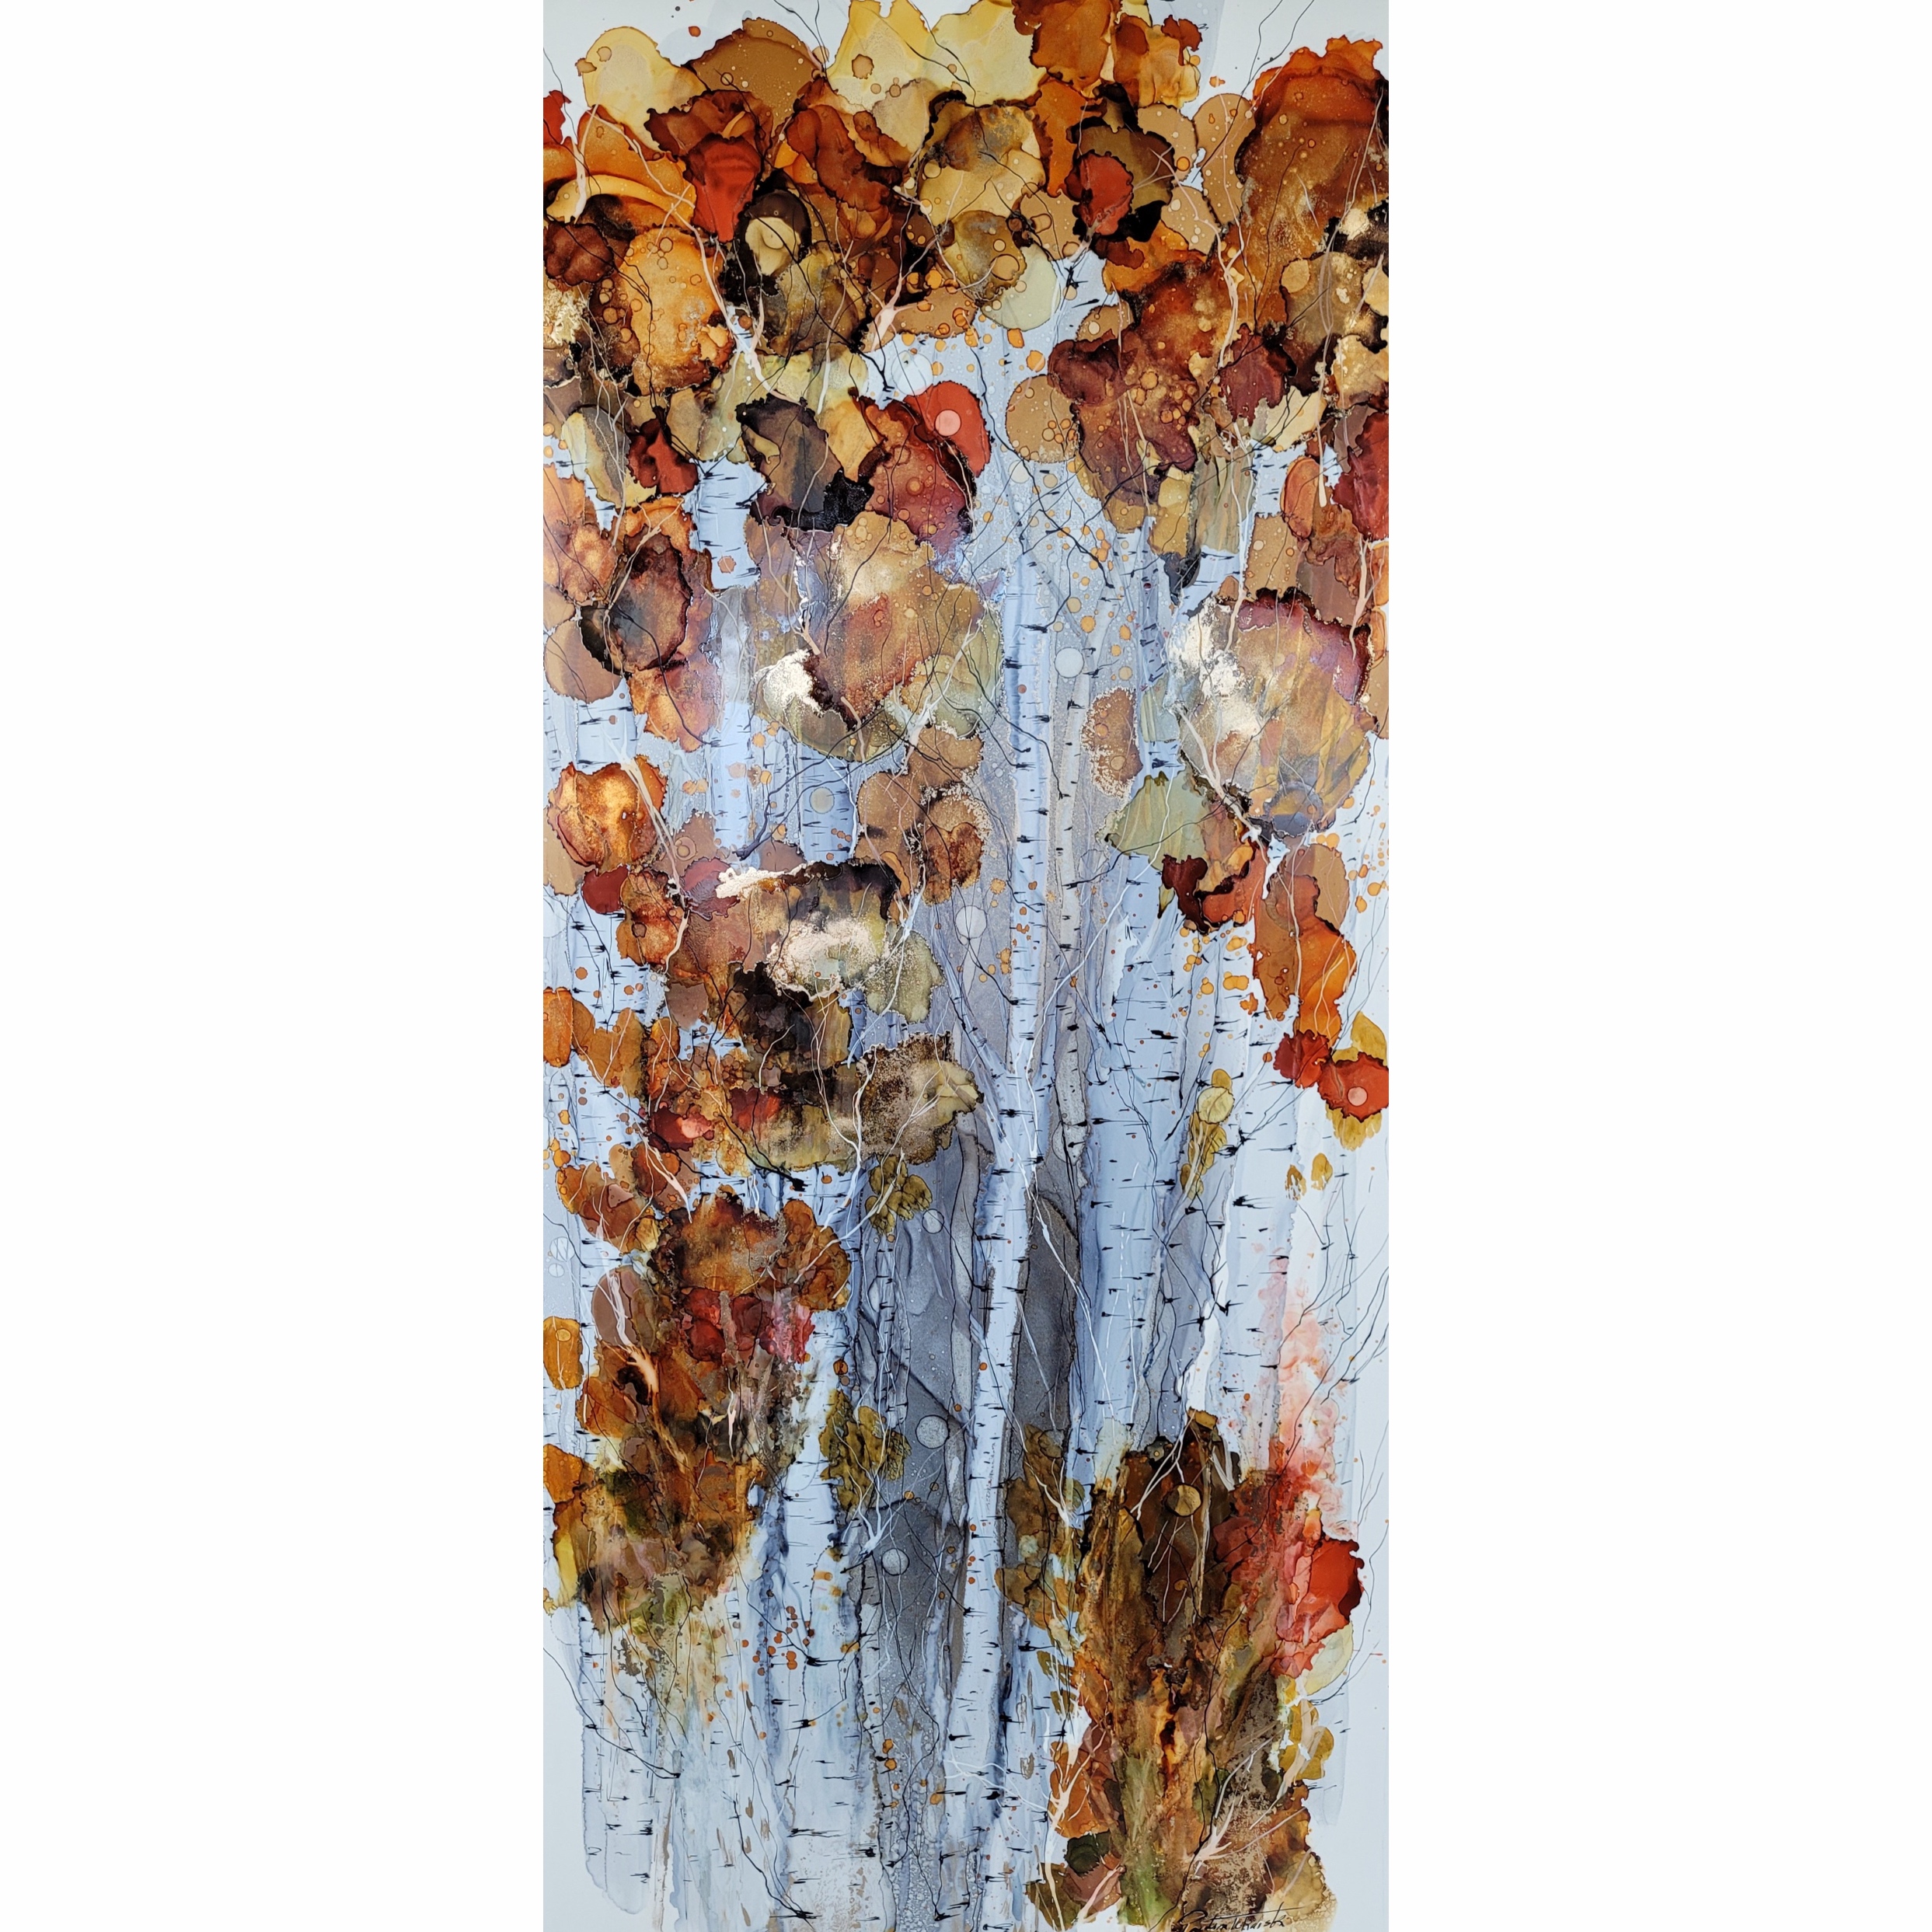 Dreaming of a Blissful Fall 2, Alcohol Ink Treescape by Paulina Tokarski | Effusion Art Gallery + Cast Glass Studio, Invermere BC